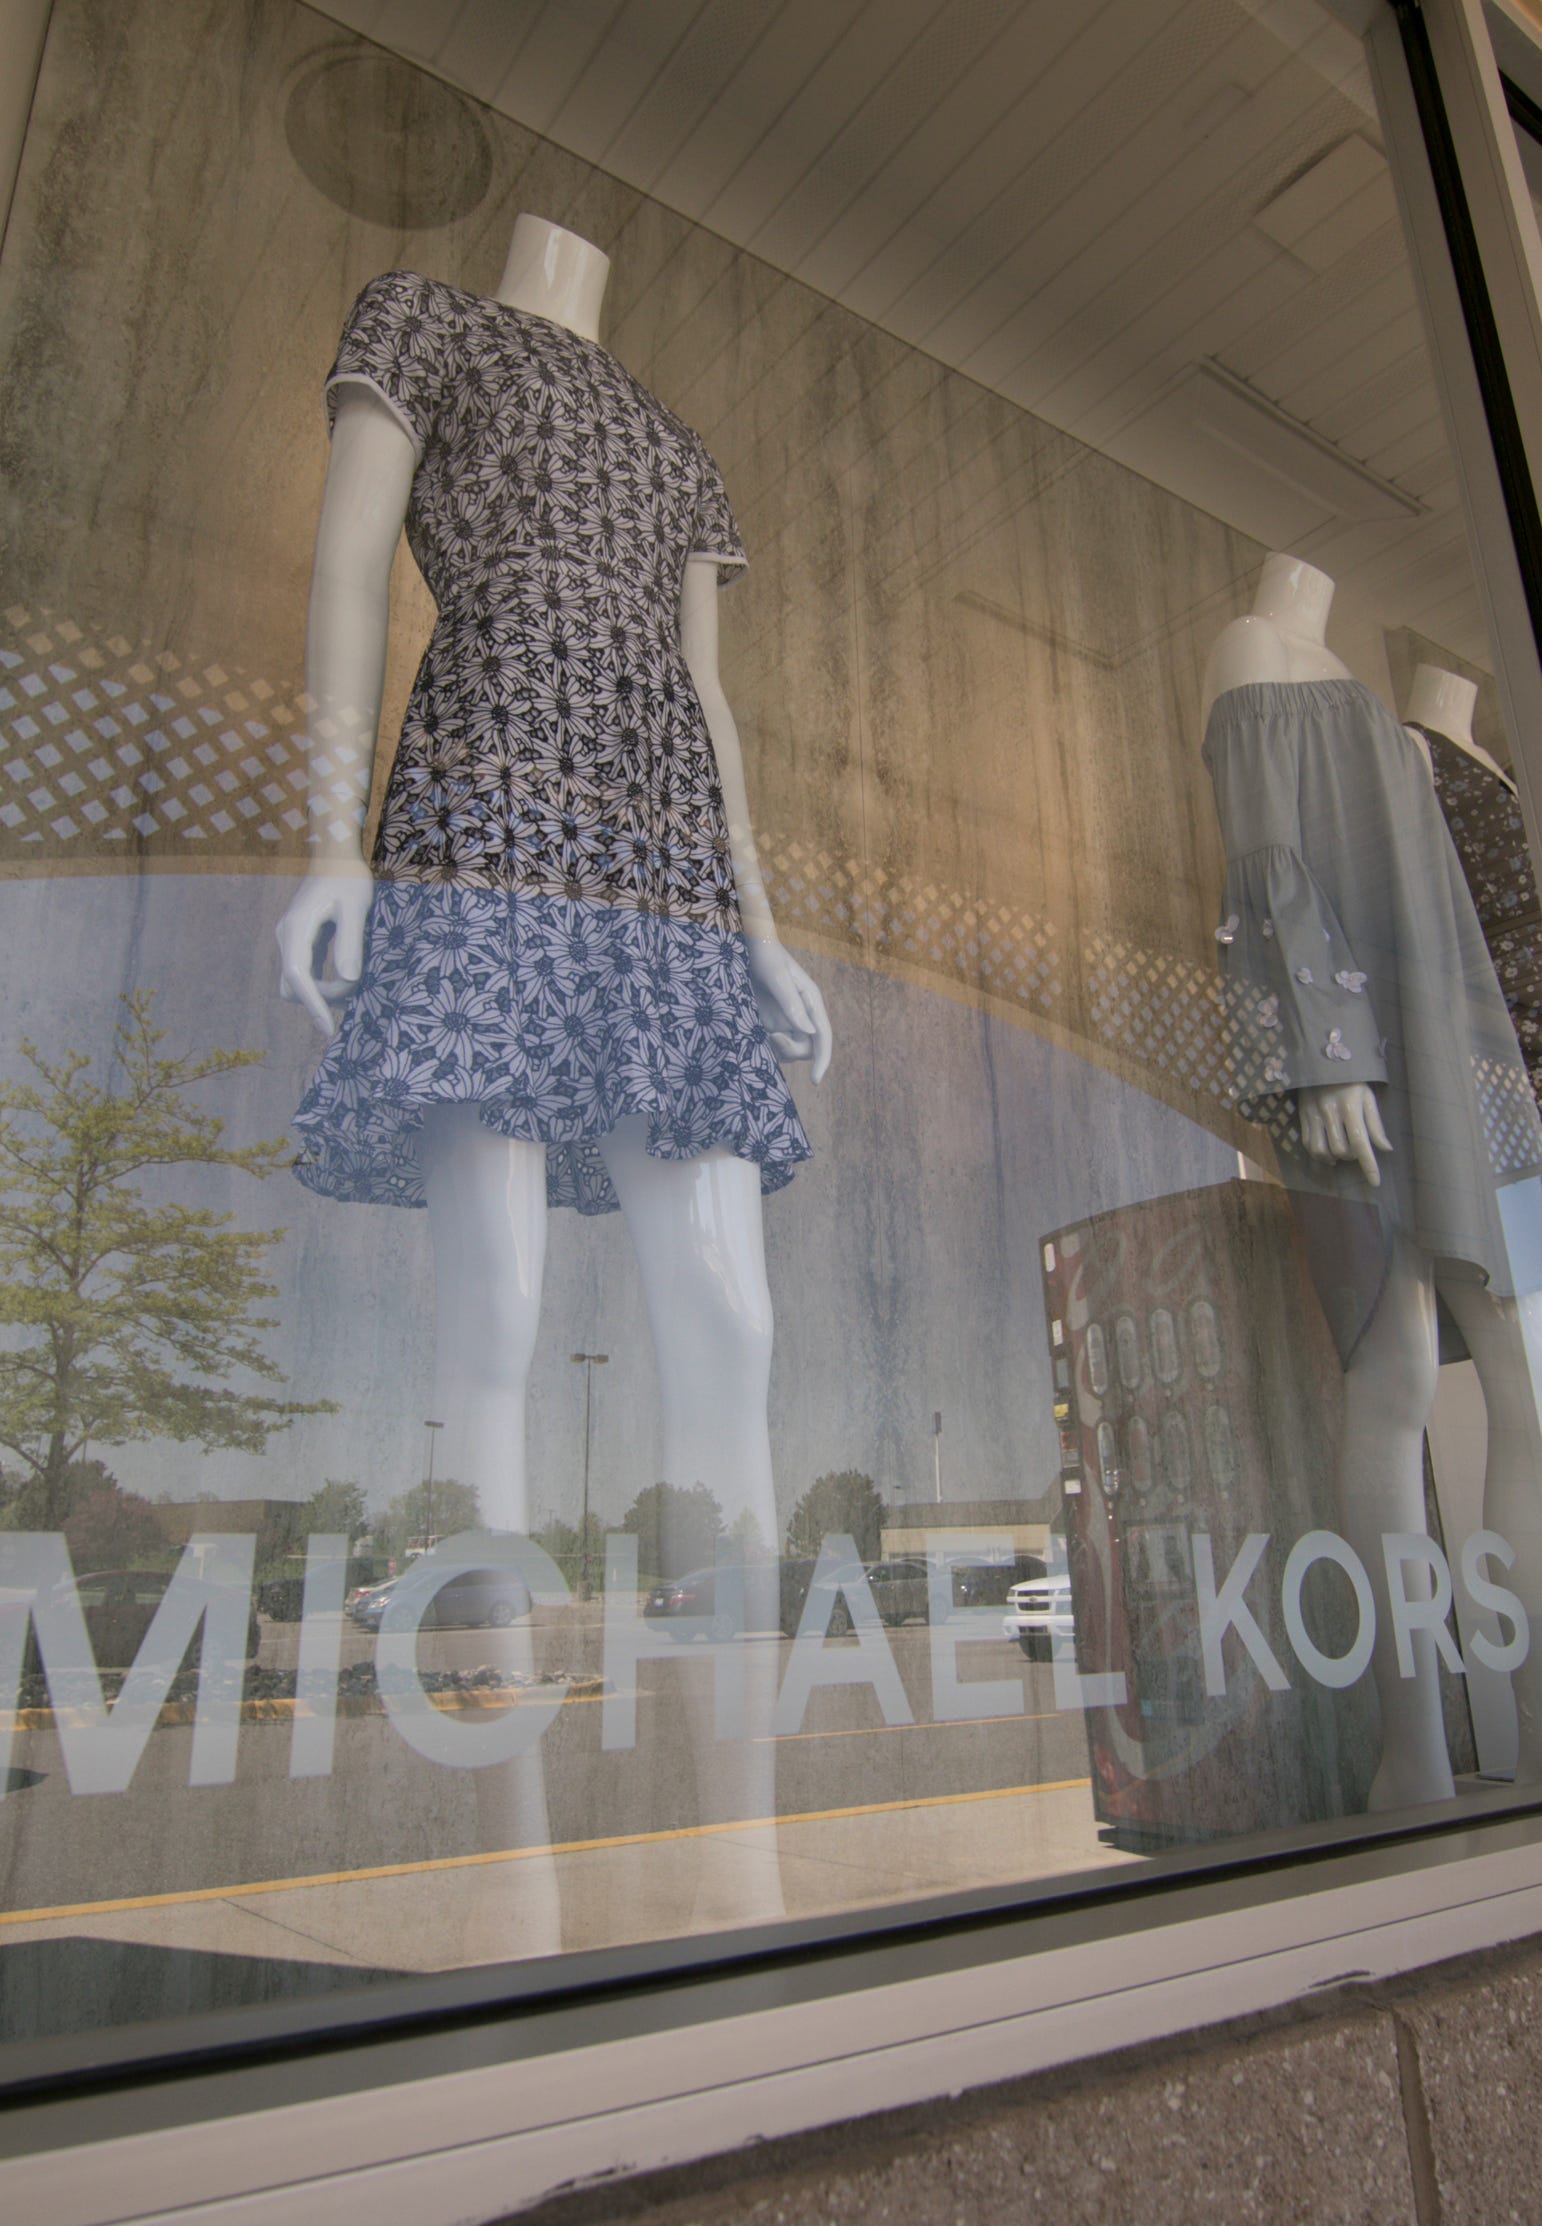 michael kors store at tanger outlet